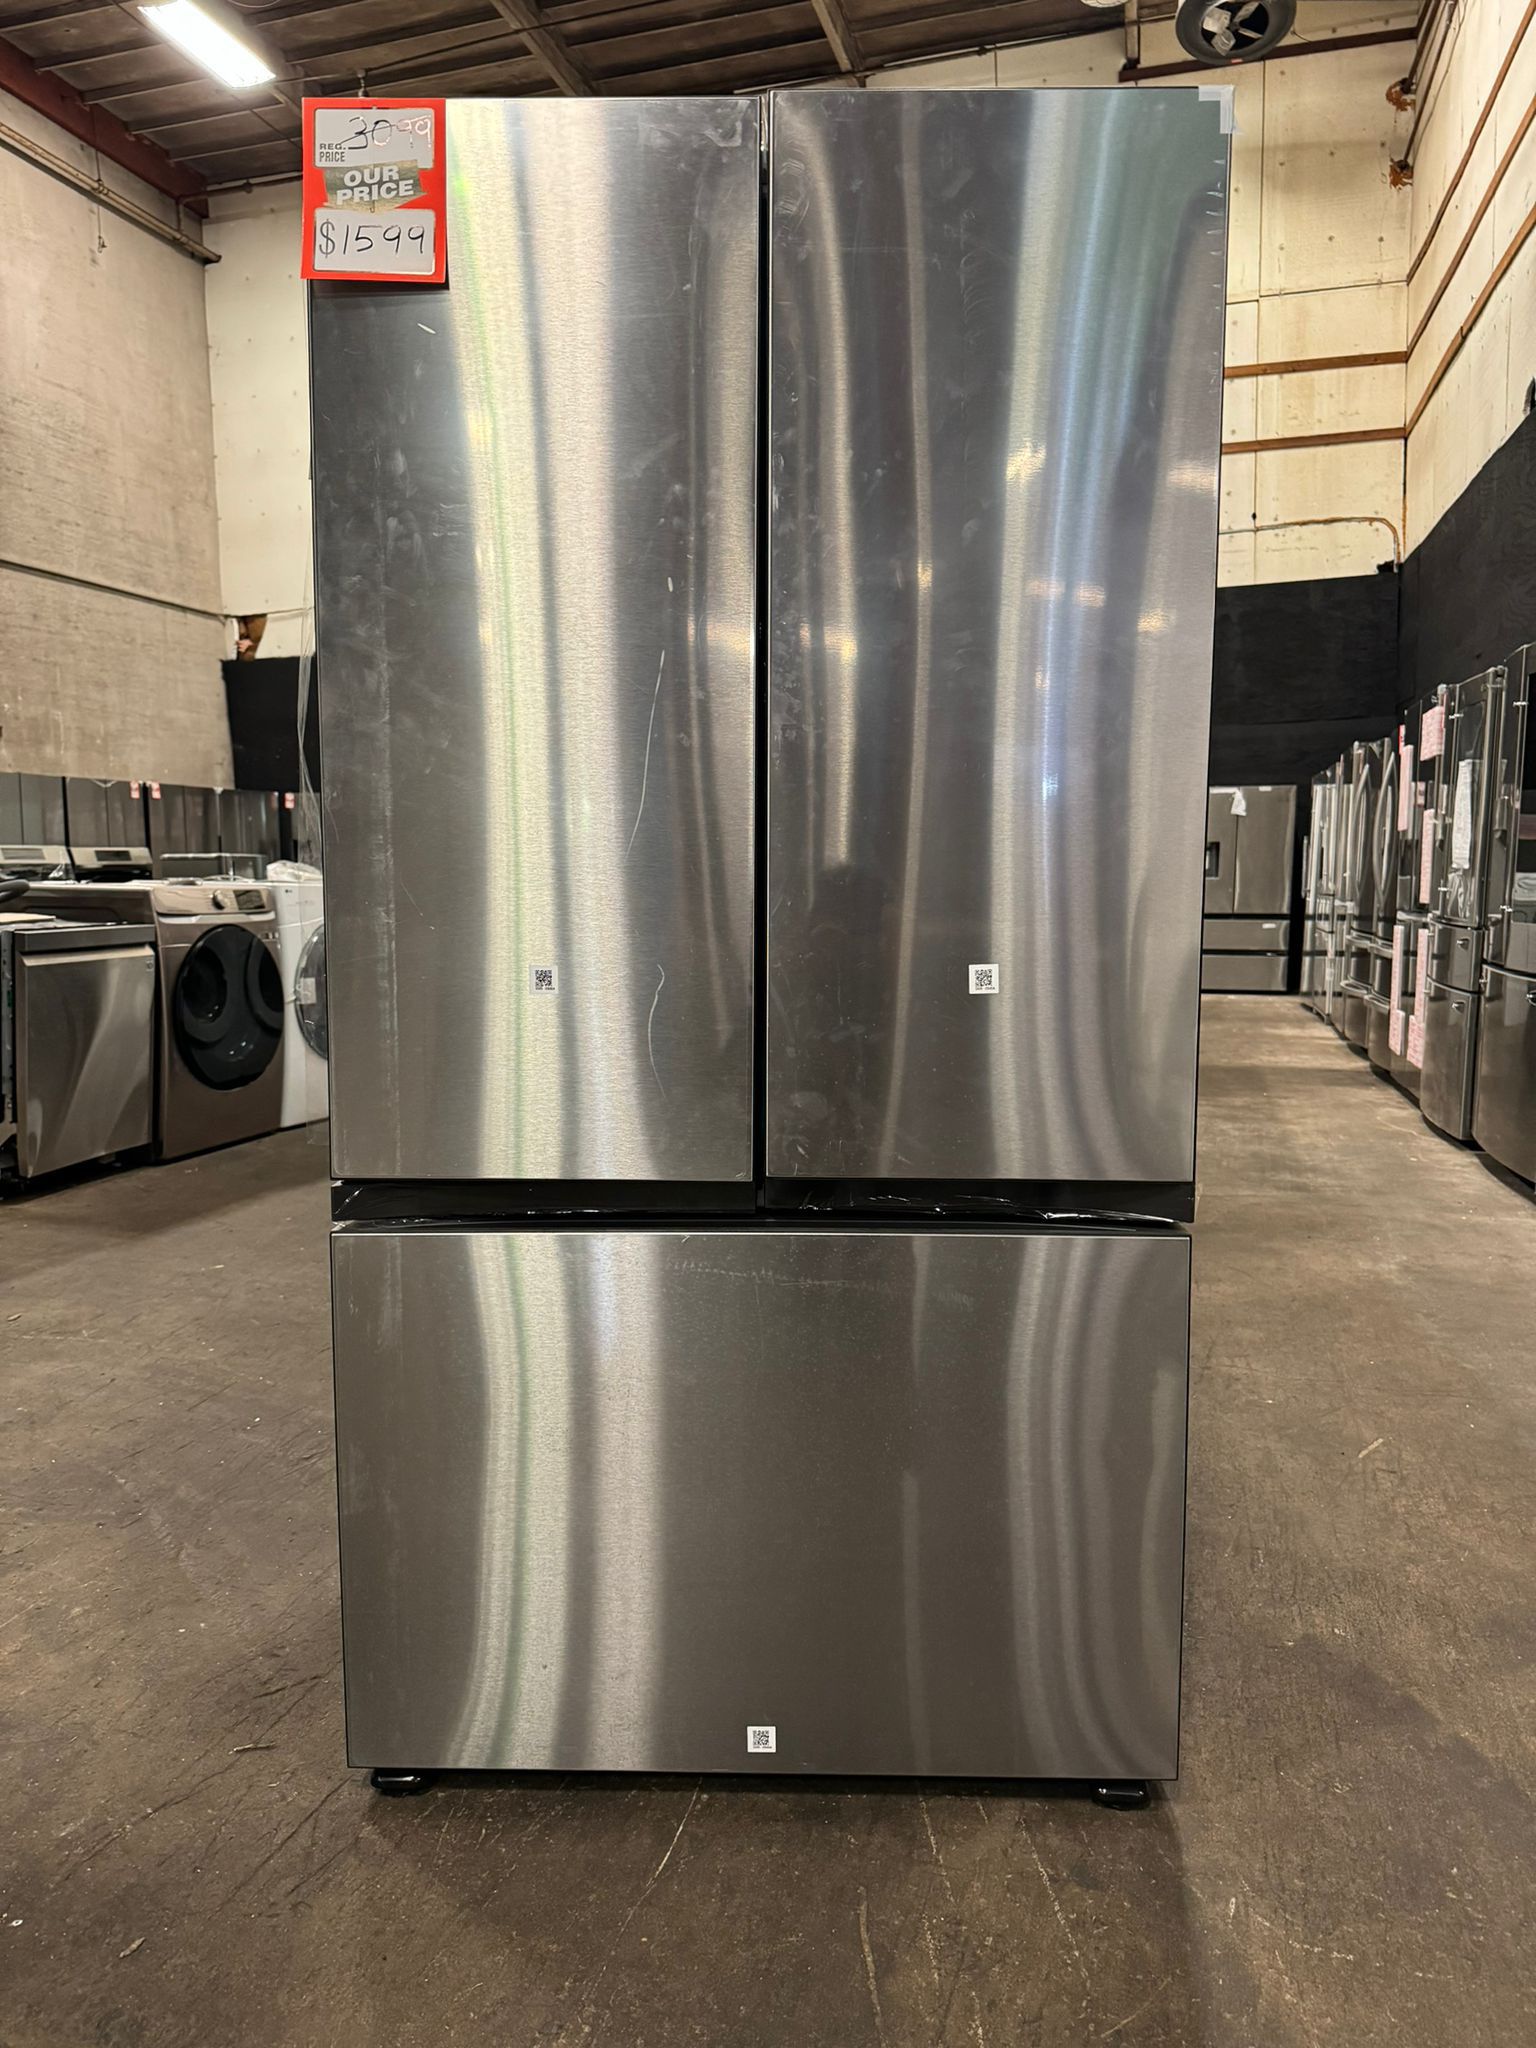 New Scratch & Dent Samsung Refrigerator French Door. Retail $3099 Our Price $1599. Delivery & Set Up Available 